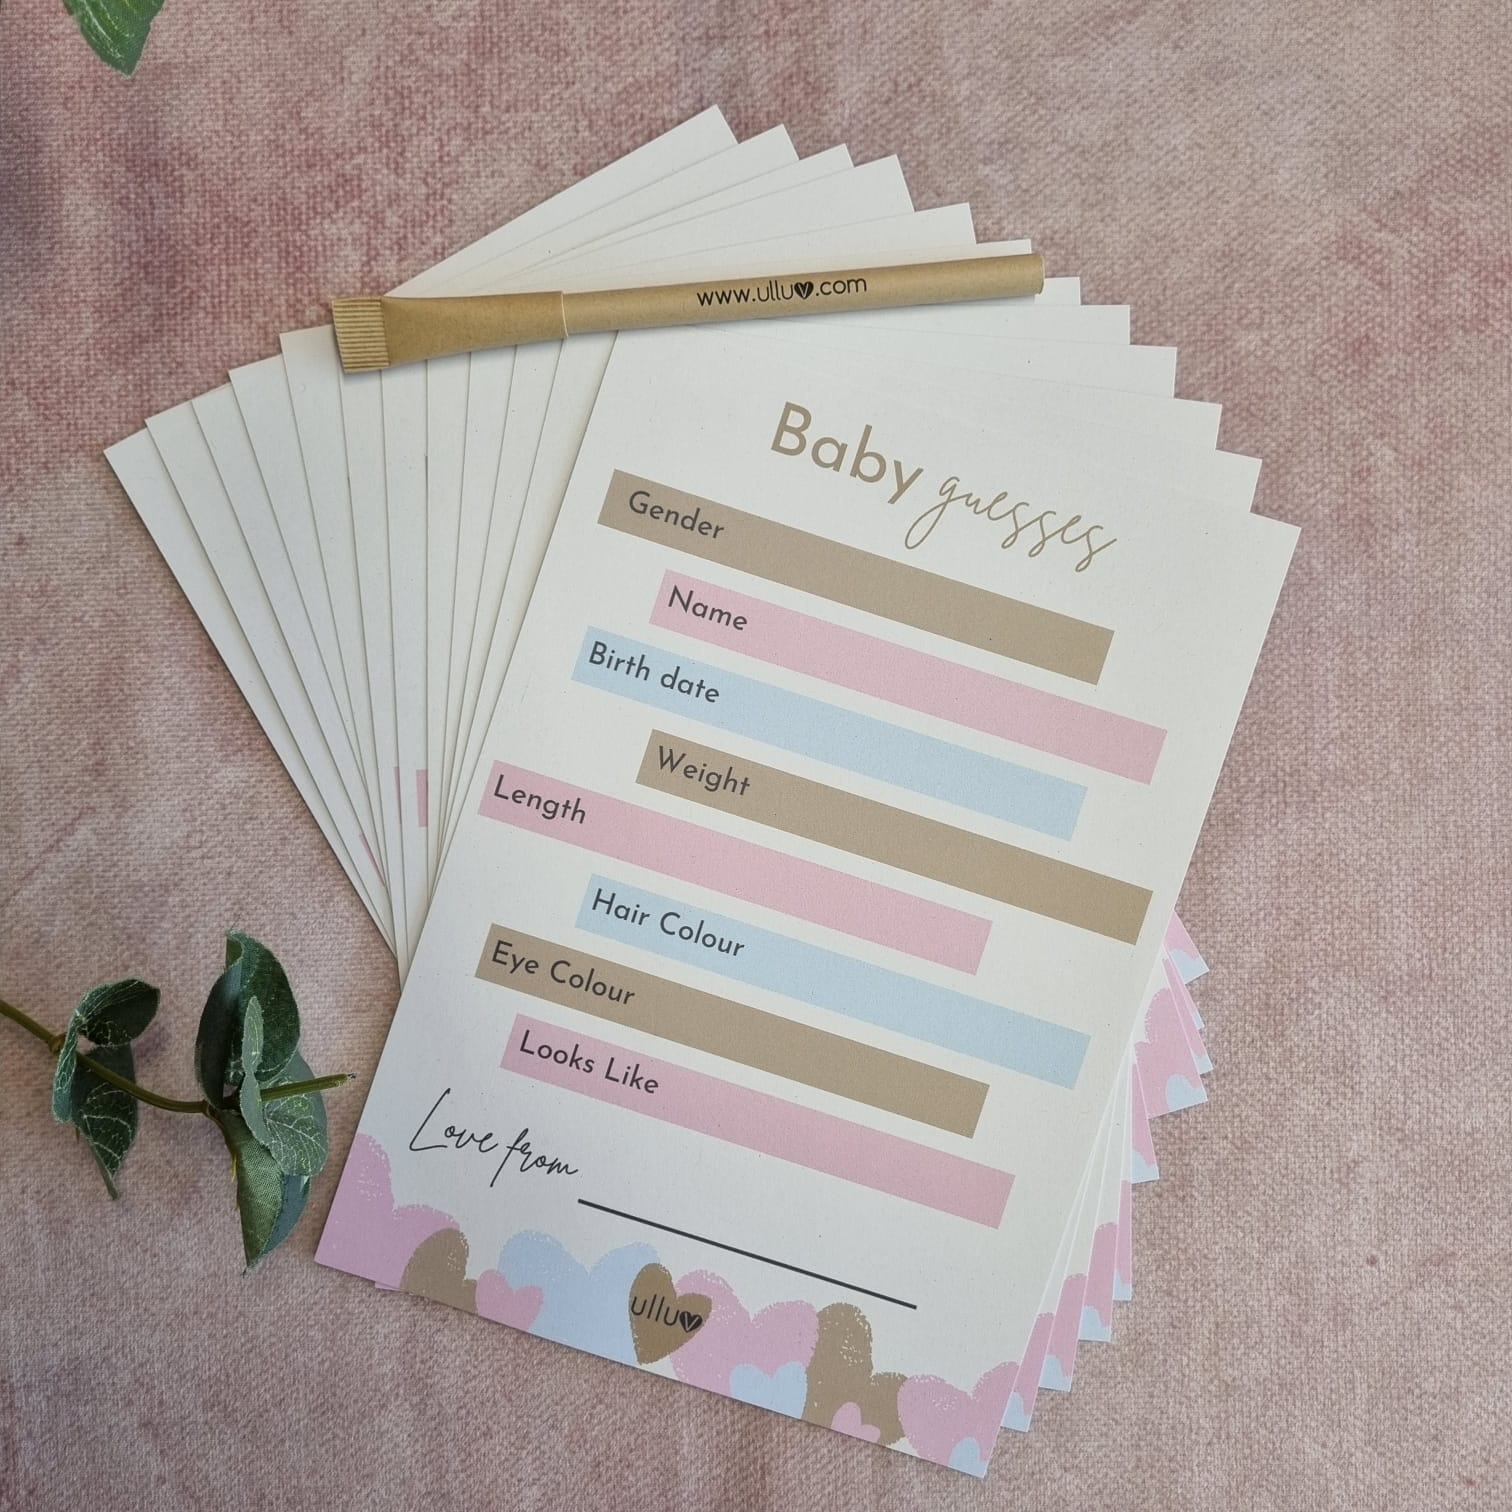 Baby Shower Game - Baby Guesses